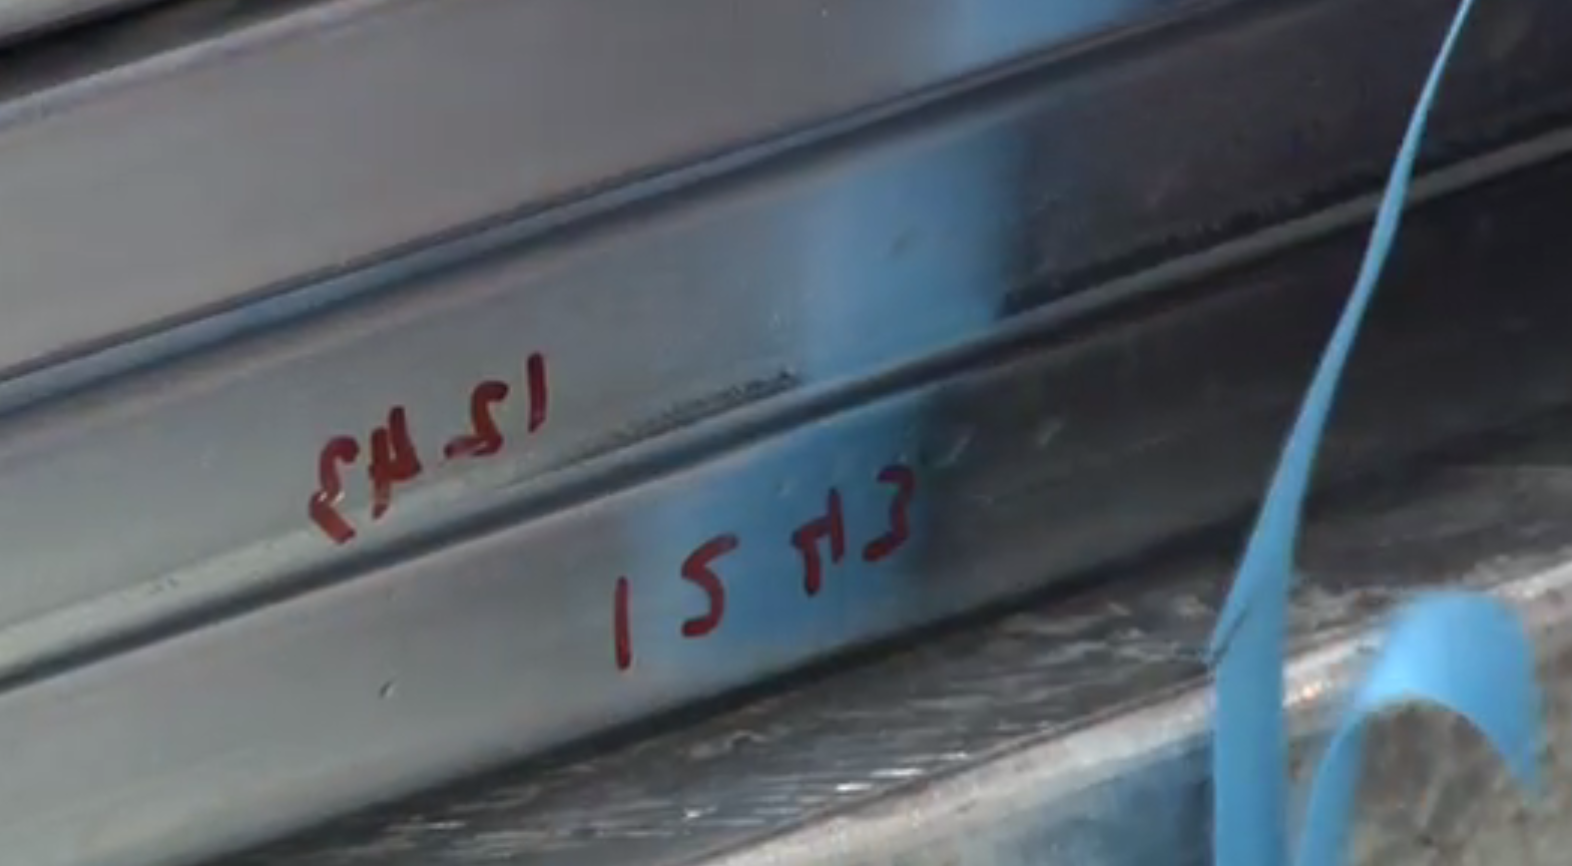 The serial numbers are written onto the parts